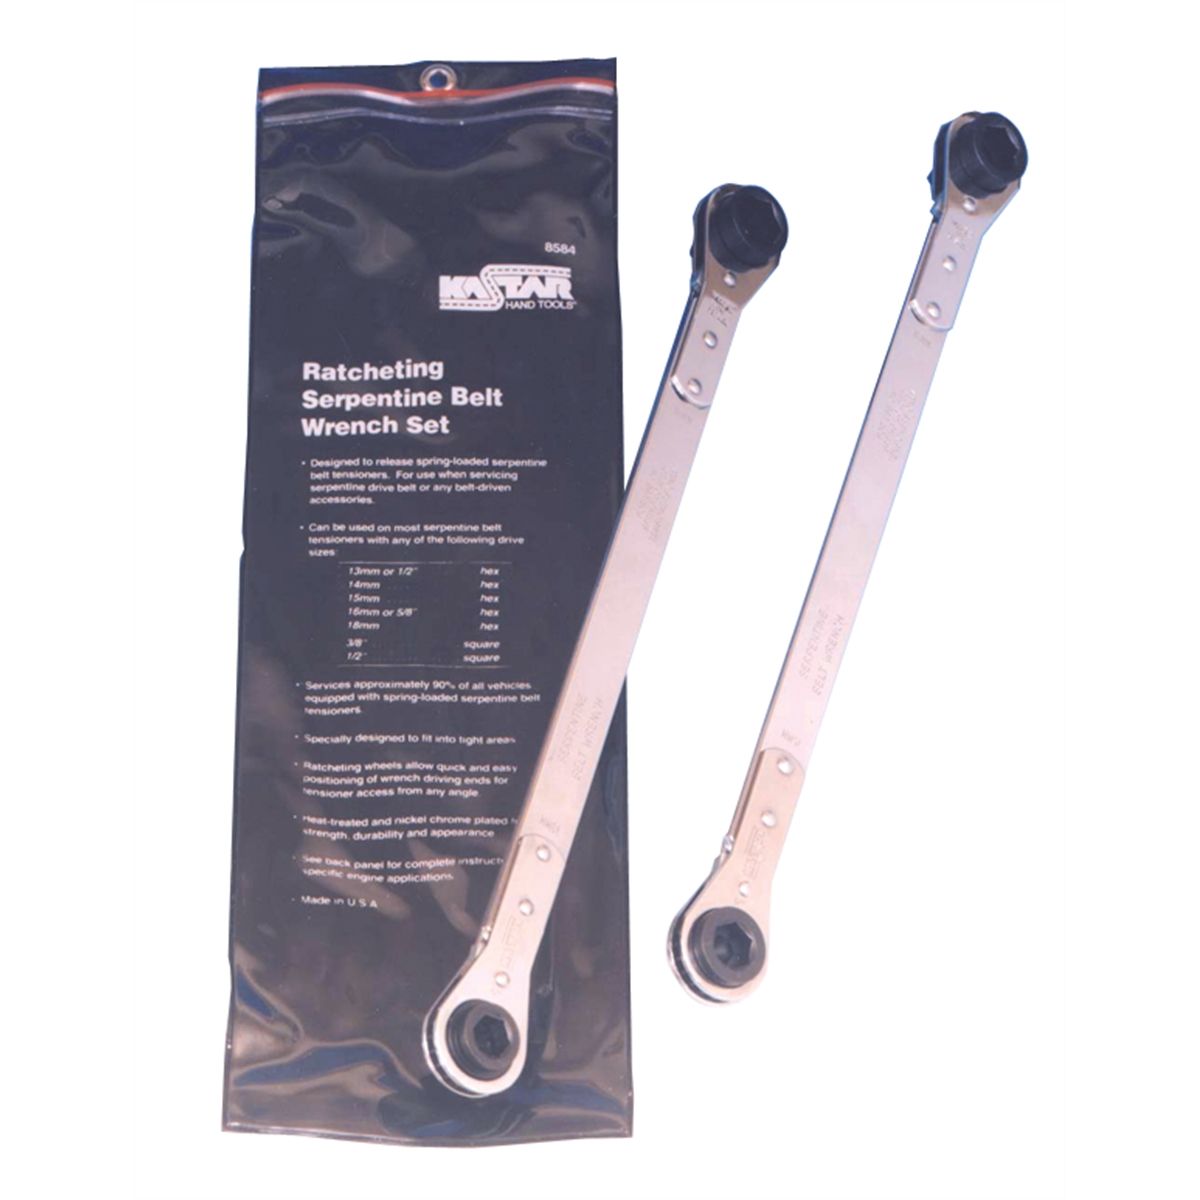 Ratcheting Serpentine Belt Wrenches - 2-Pc